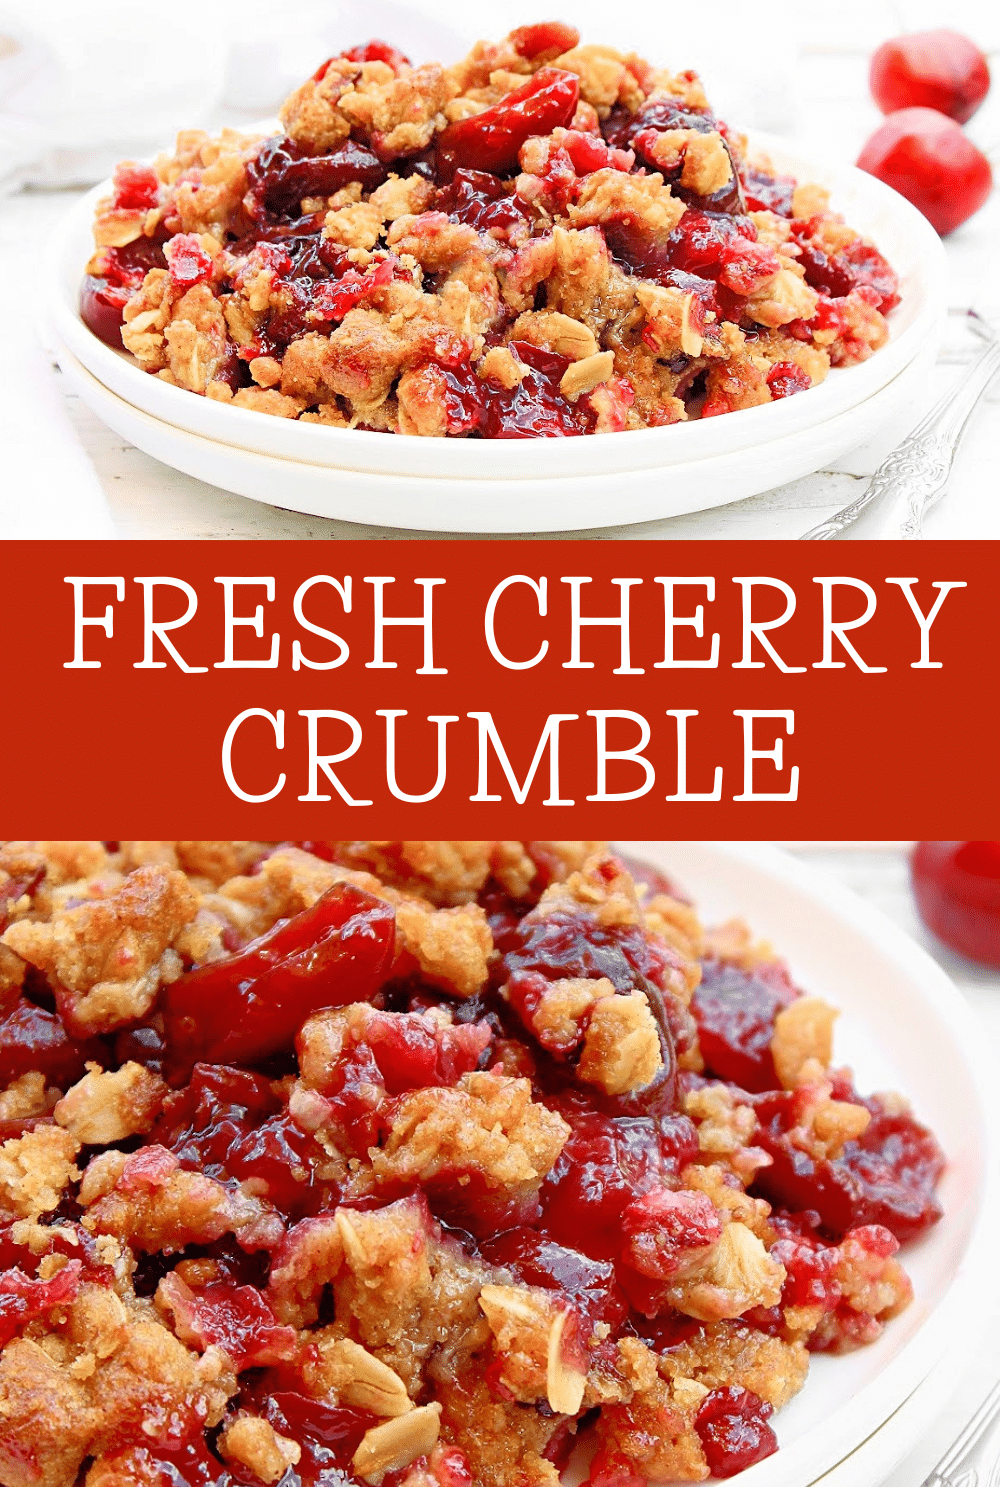 Fresh Cherry Crumble ~ This easy crumble dessert made with freshly picked cherries will charm your guests with its flavor and simplicity!  via @thiswifecooks